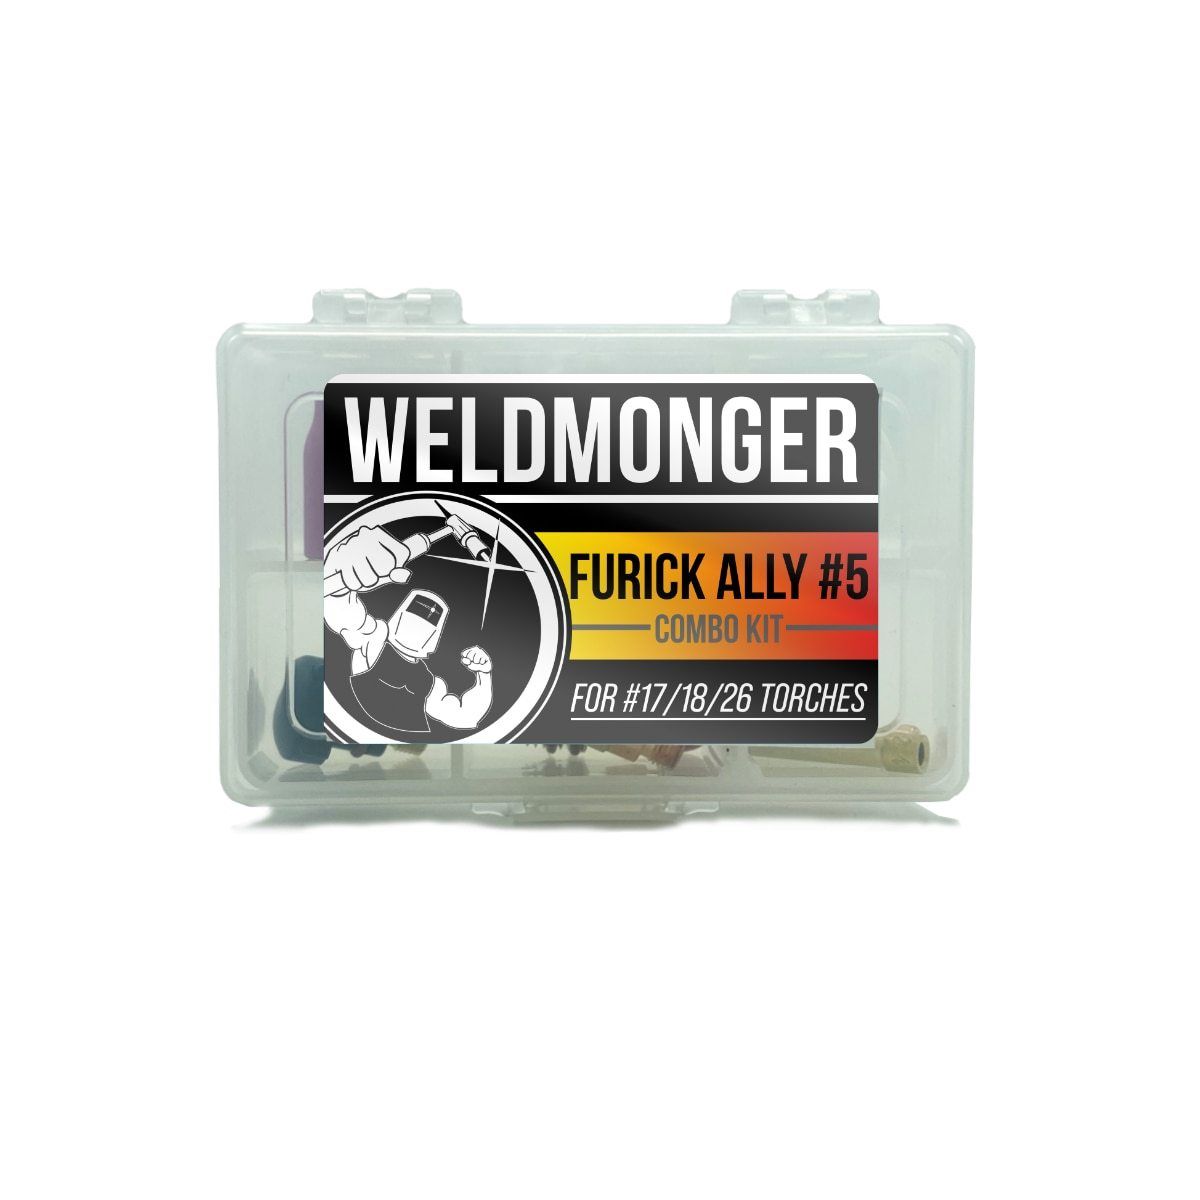 WELDMONGER® Furick Ally #5 Combo Kit - For 17,18,26 Style Torches